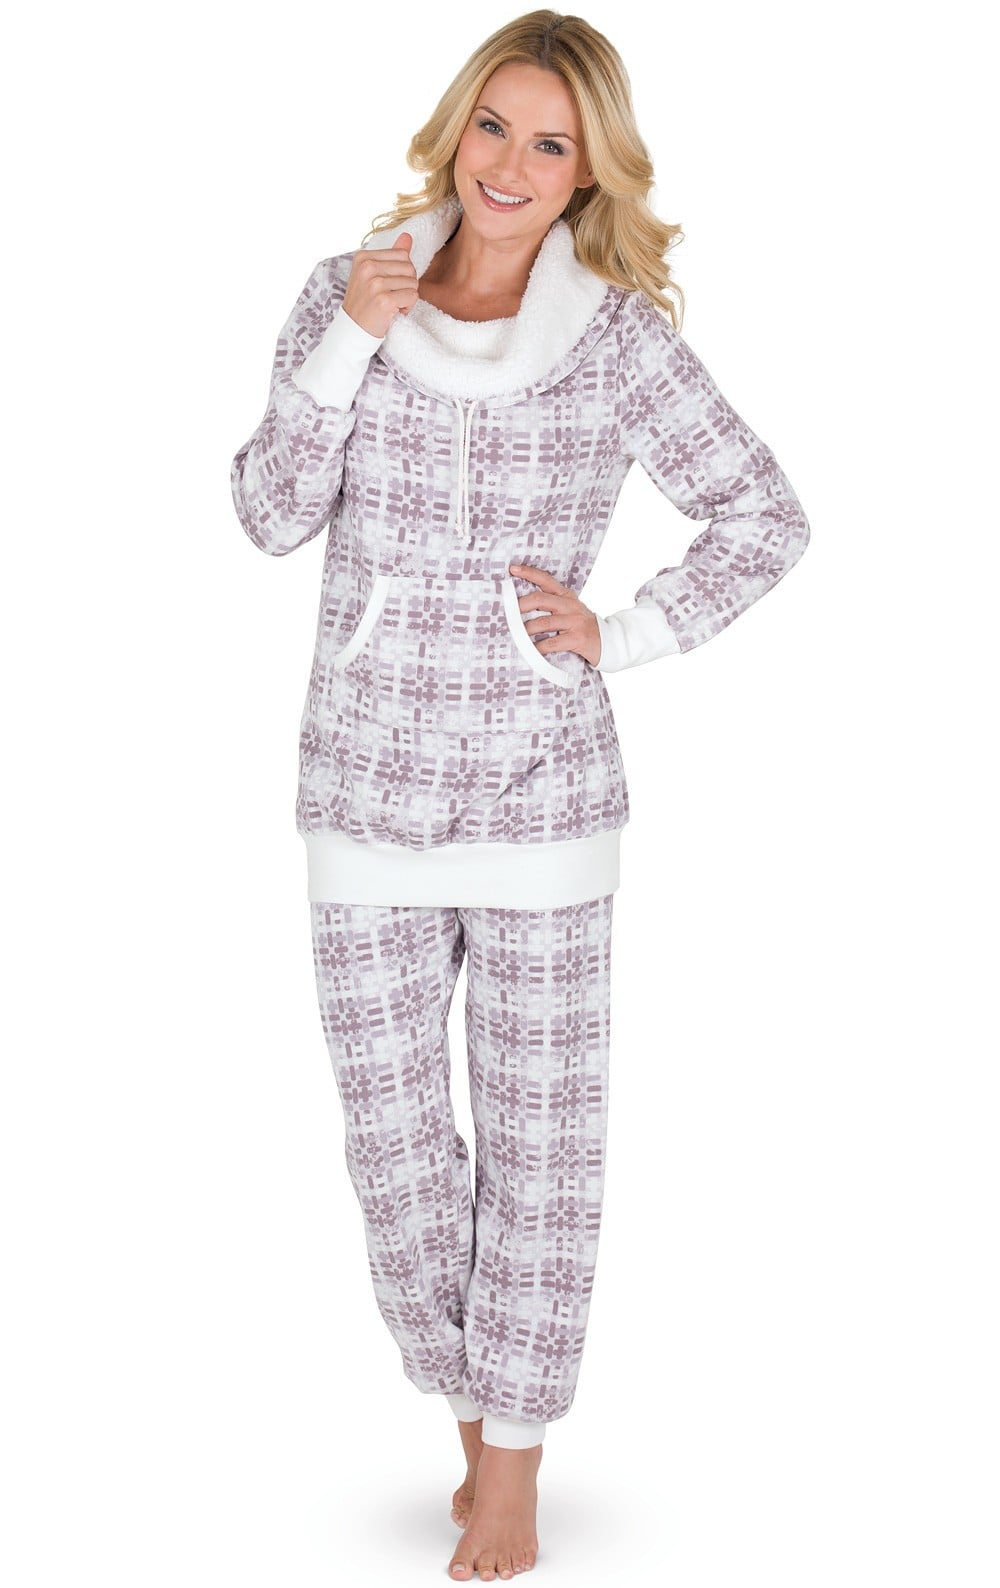 Chalet Shearling Rollneck Pajamas  These Are the Cosy, Functional